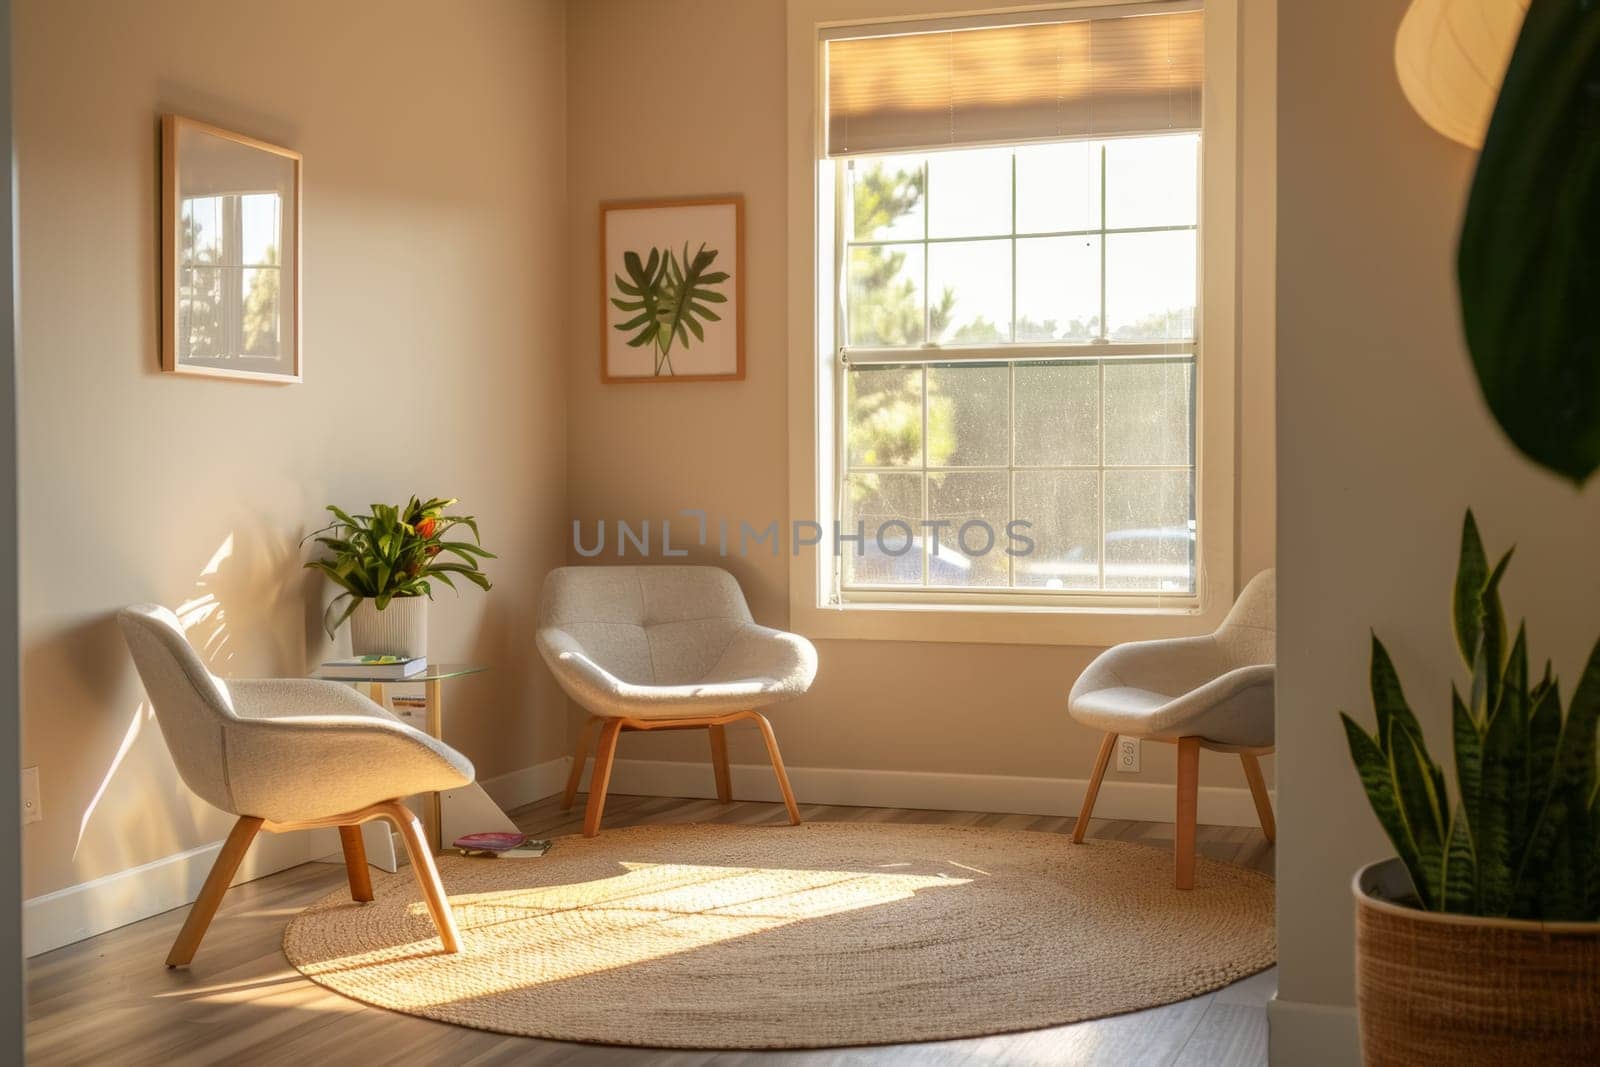 Natural sunlight streams through a window into a comforting counseling room with minimalist décor and soothing neutral tones.